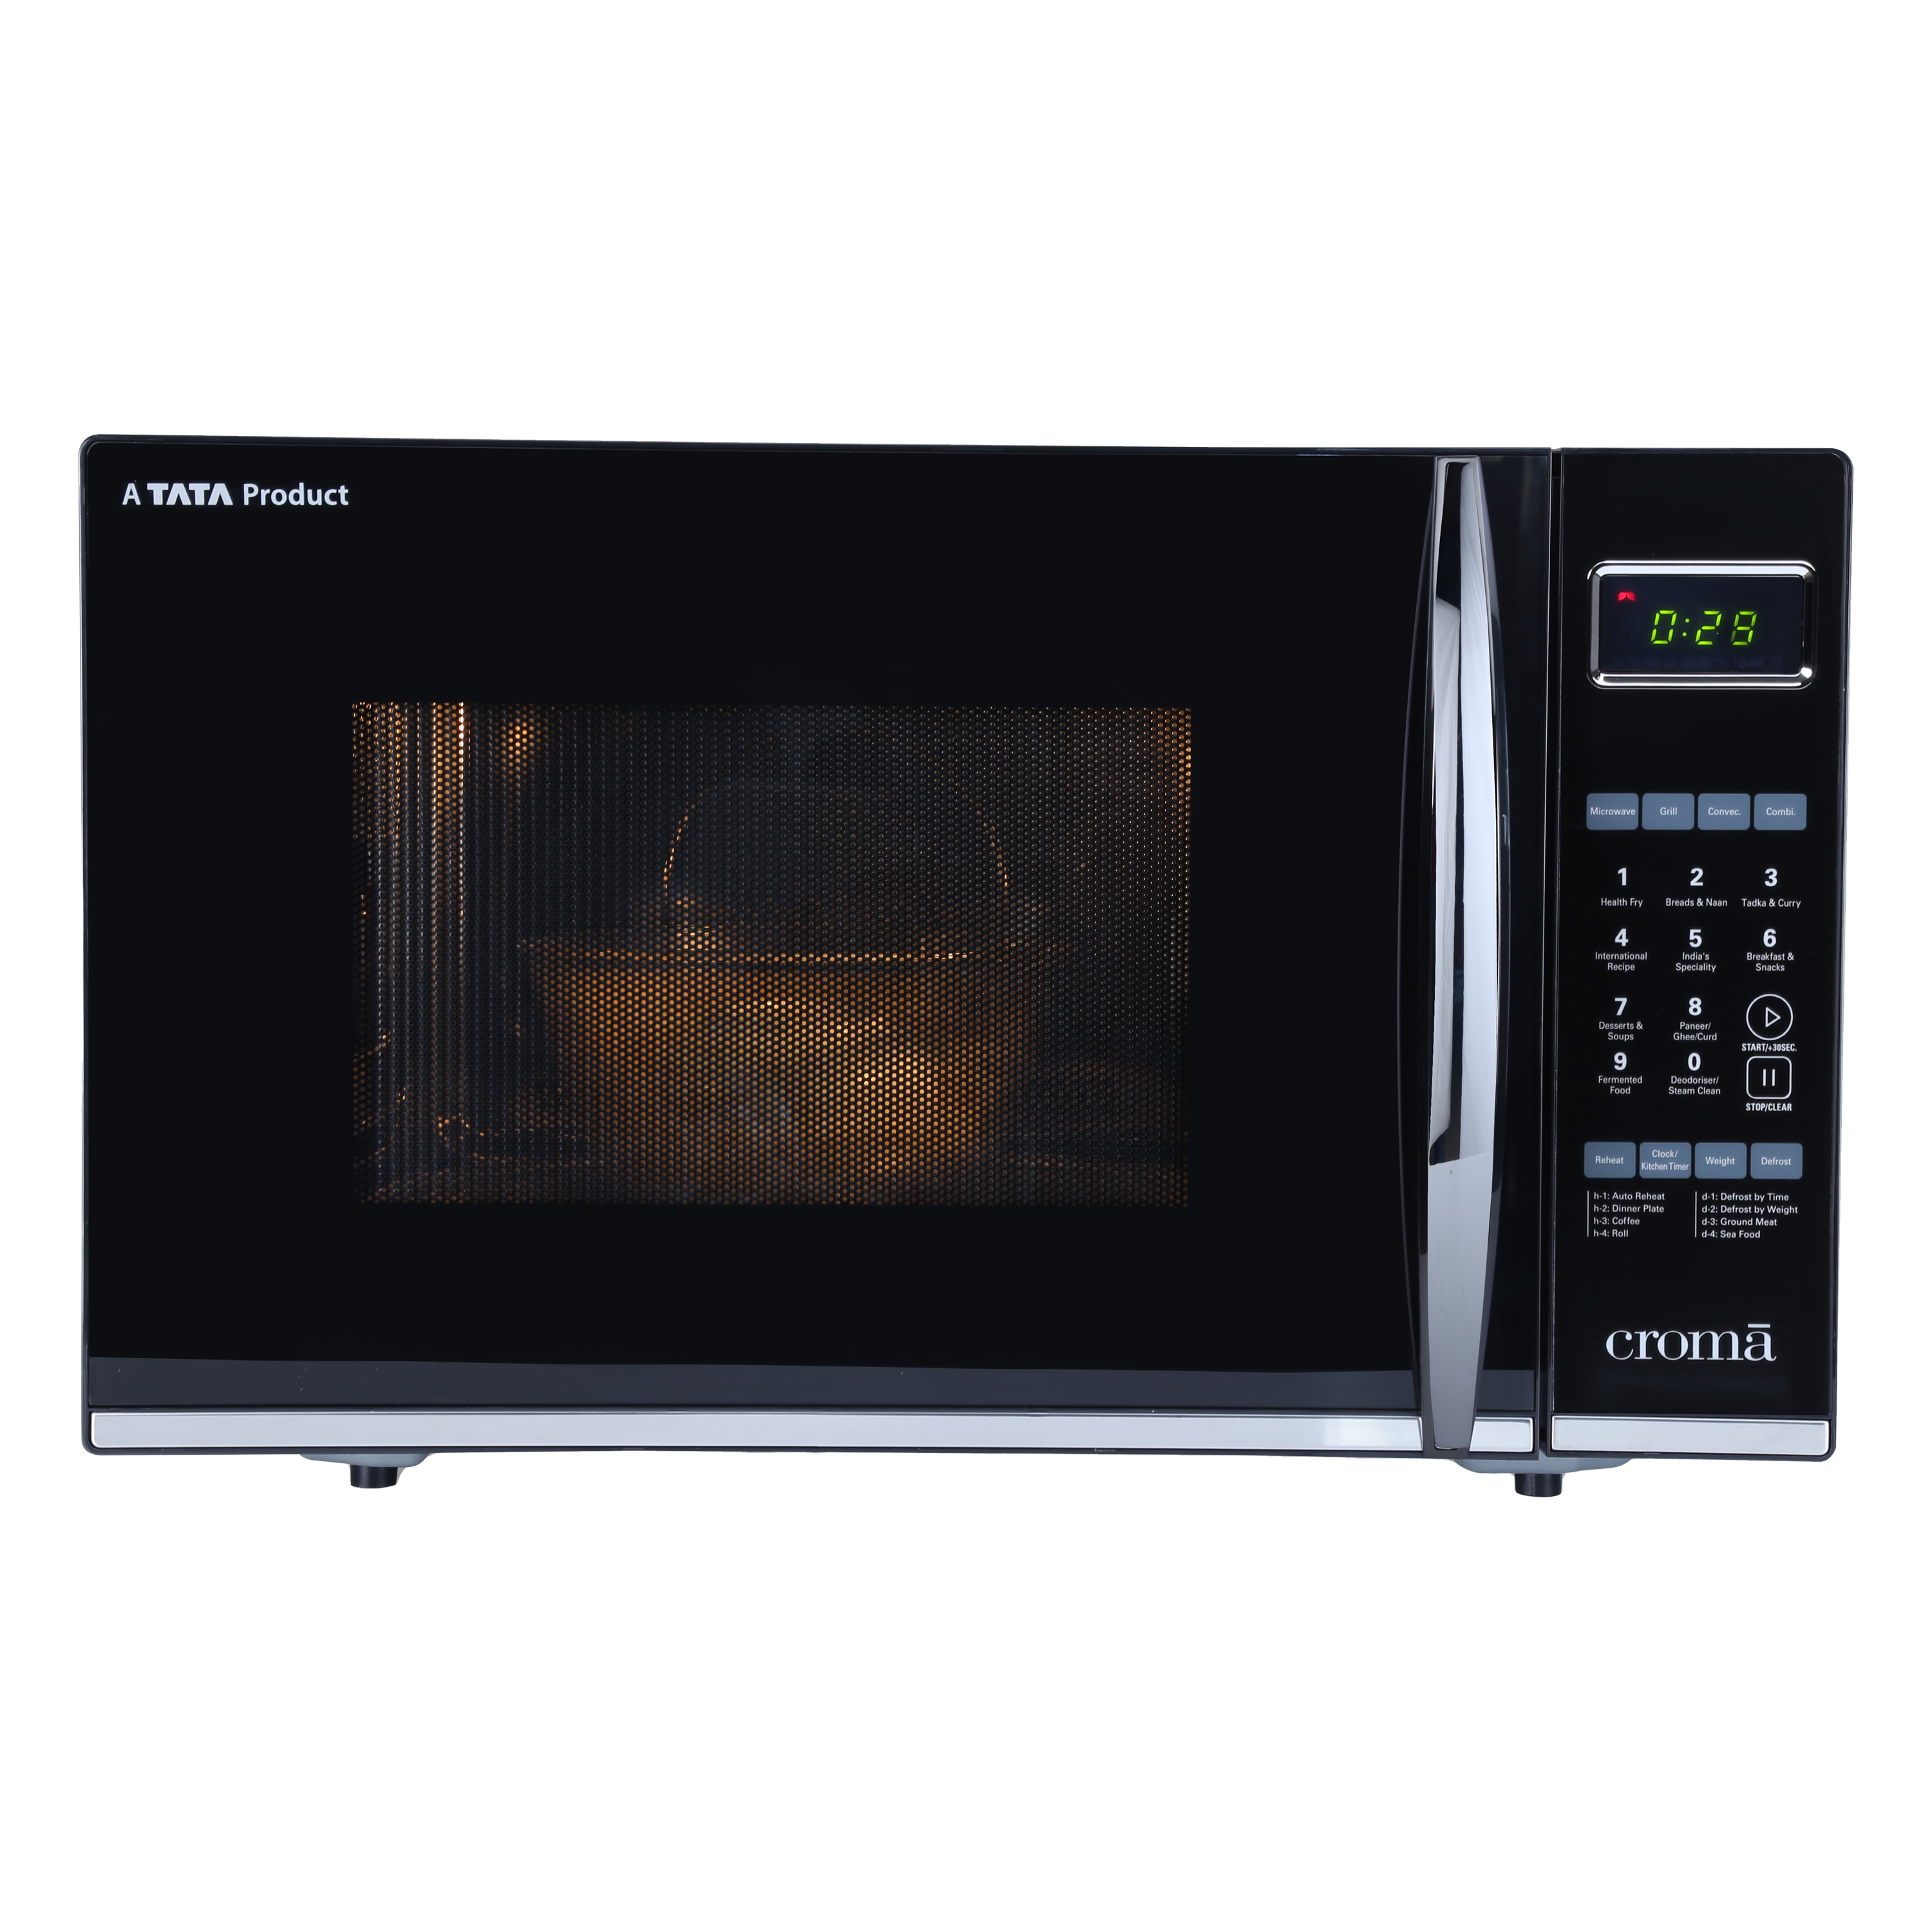 Croma 30 Litres Convection Microwave Oven (Child Safety Lock, CRAM0152, Black)_1